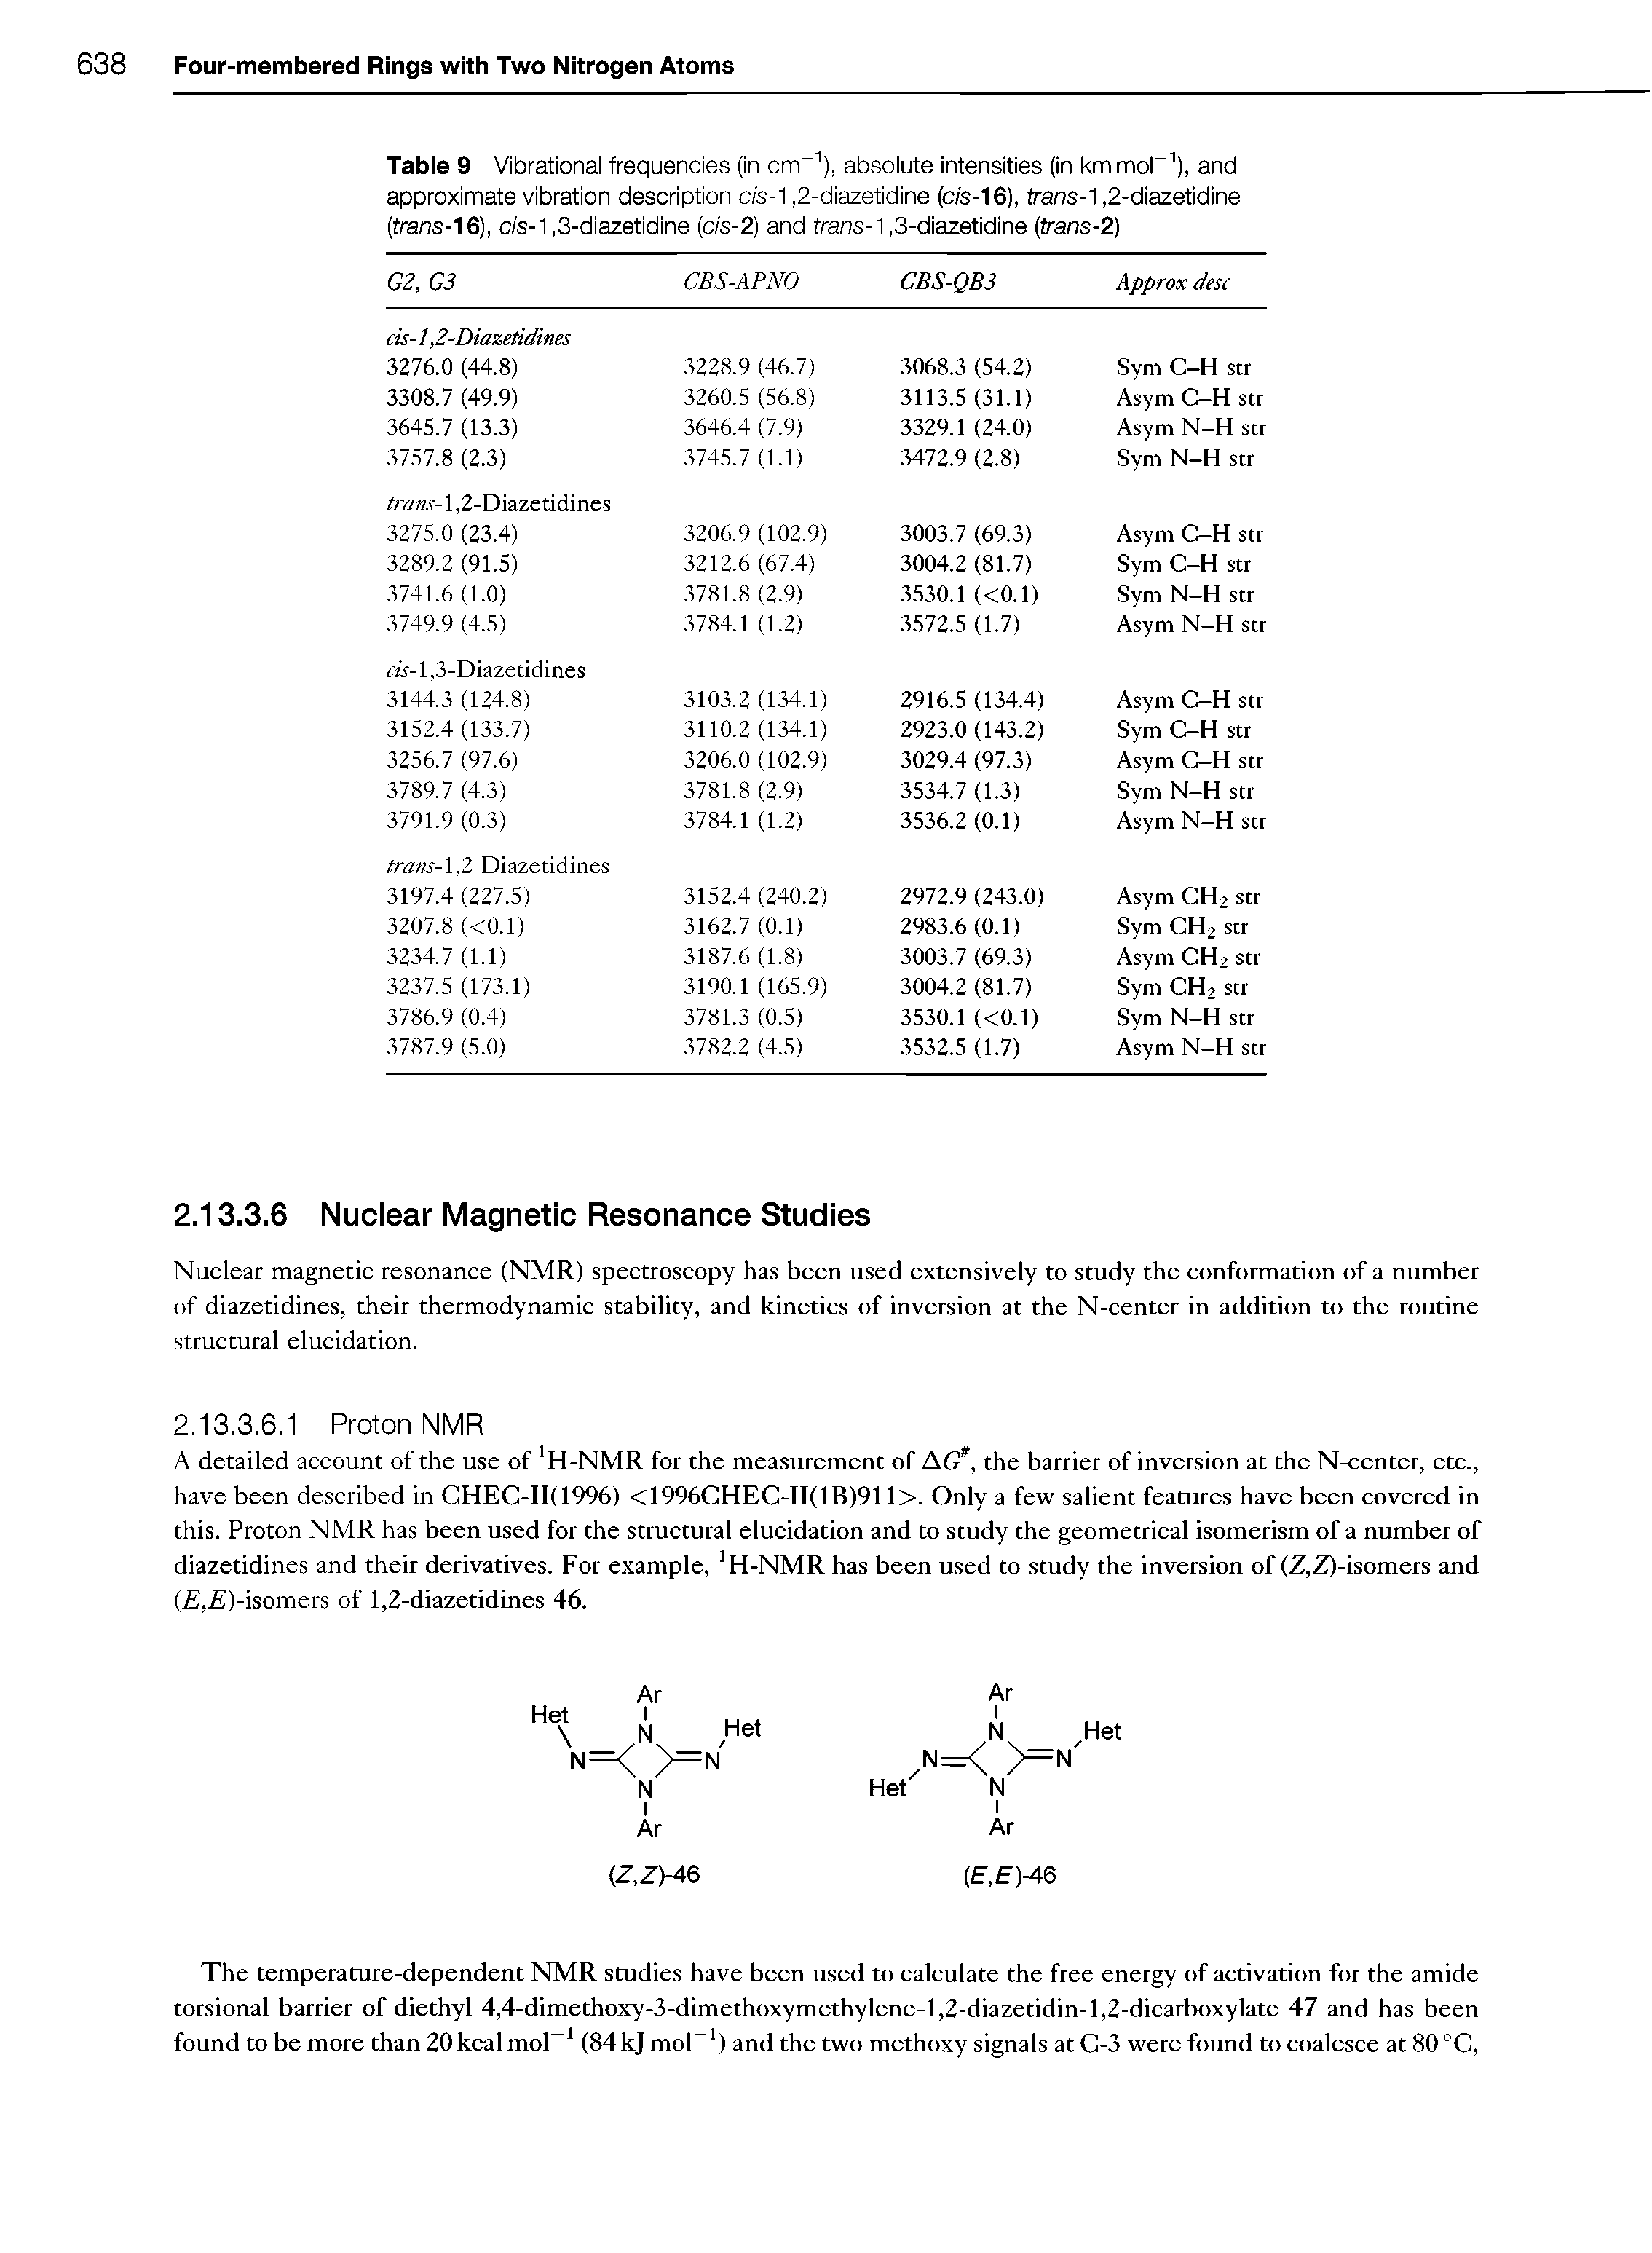 Table 9 Vibrational frequencies (in crrr1), absolute intensities (in km mol-1), and approximate vibration description c/s-1,2-diazetidine (c/s-16), frans-1,2-diazetidine (frans-16), c/s-1,3-diazetidine (c/s-2) and frans-1,3-diazetidine (trans-2)...